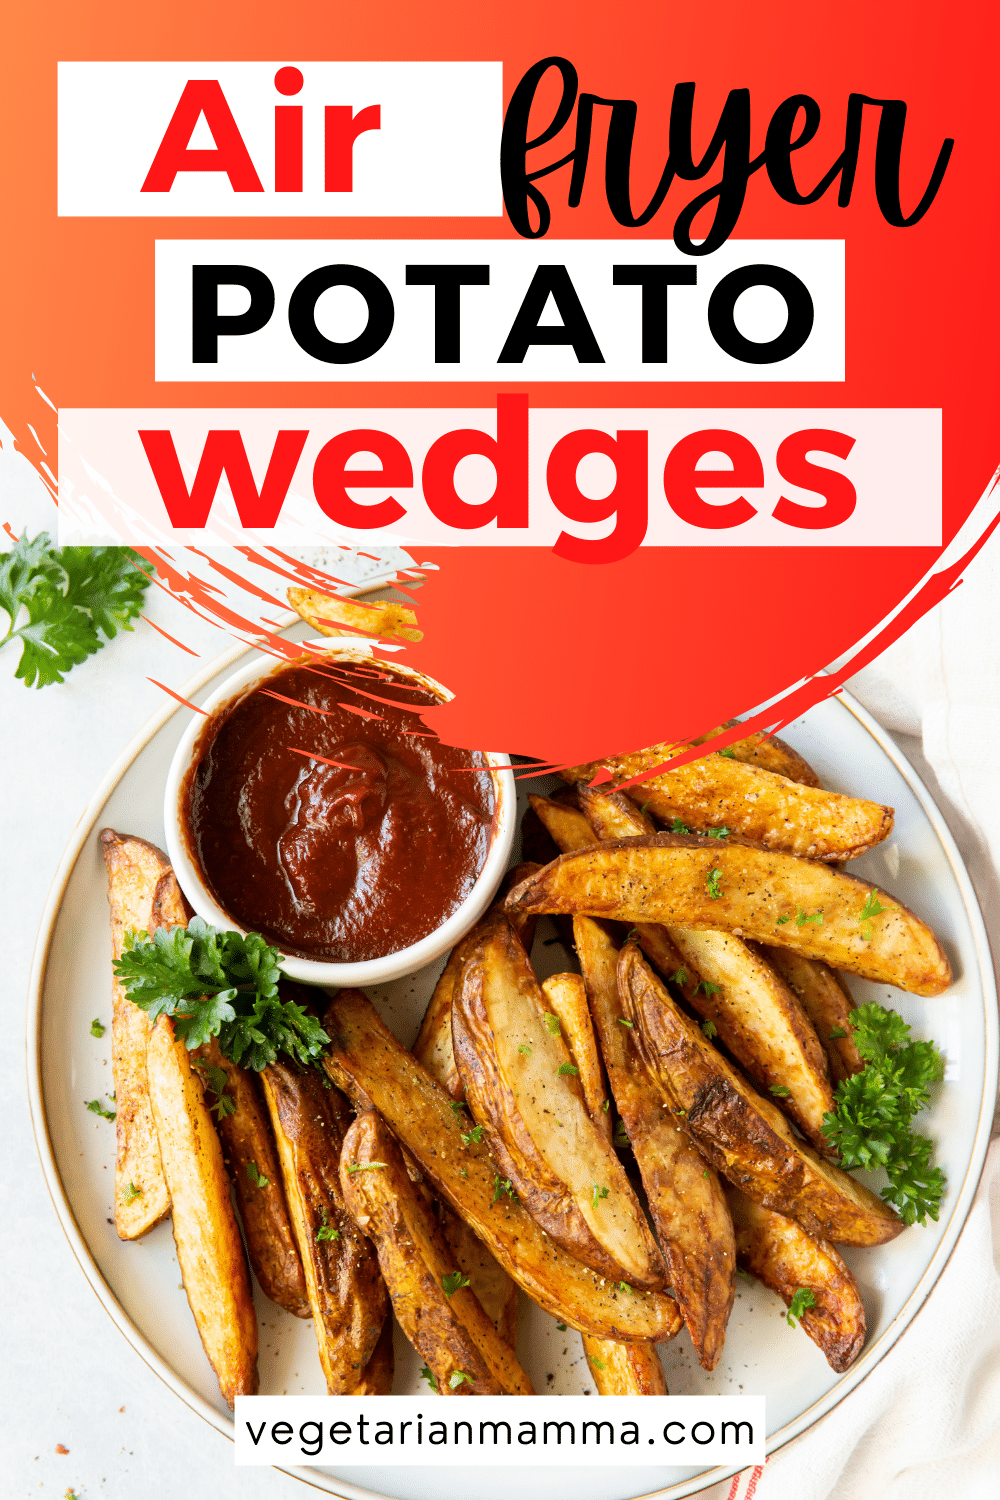 Air Fryer Potato Wedges are perfectly crisp on the outside and tender on the inside! You are going to love these air fryer potato wedges!